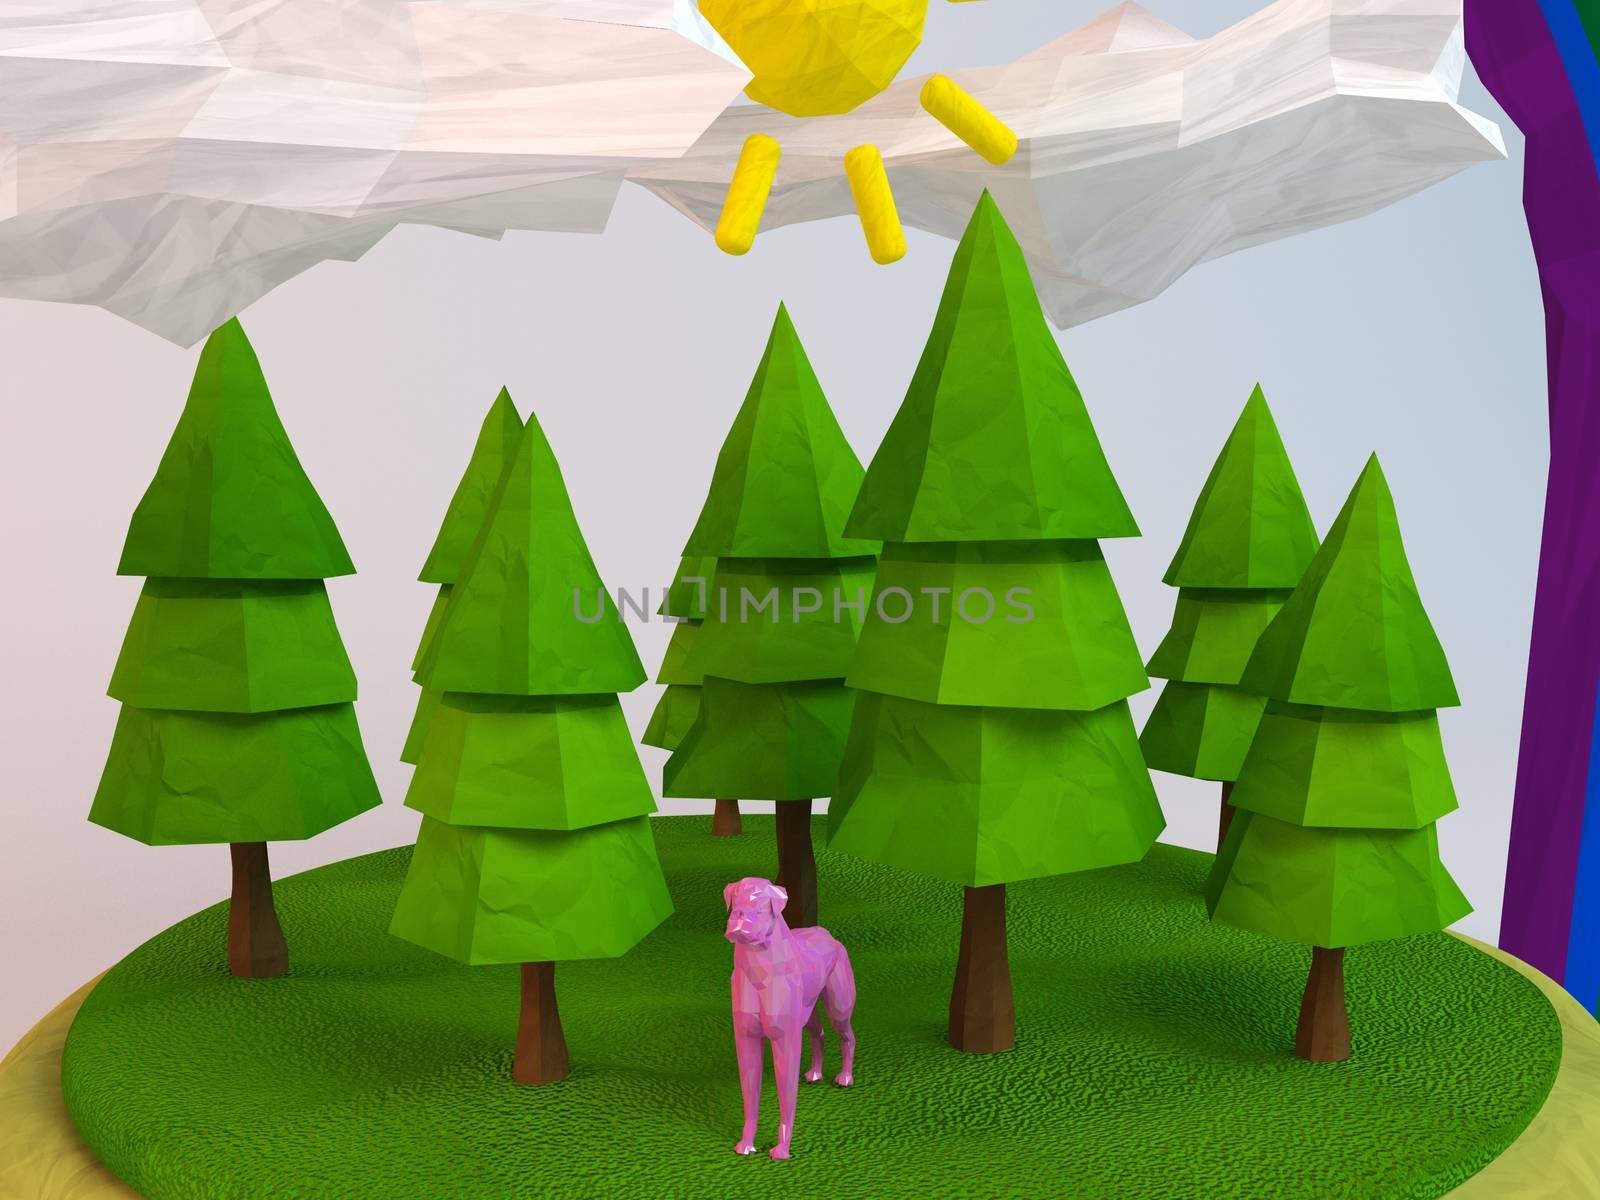 3d dog inside a low-poly green scene with sun, trees, clouds and a rainbow